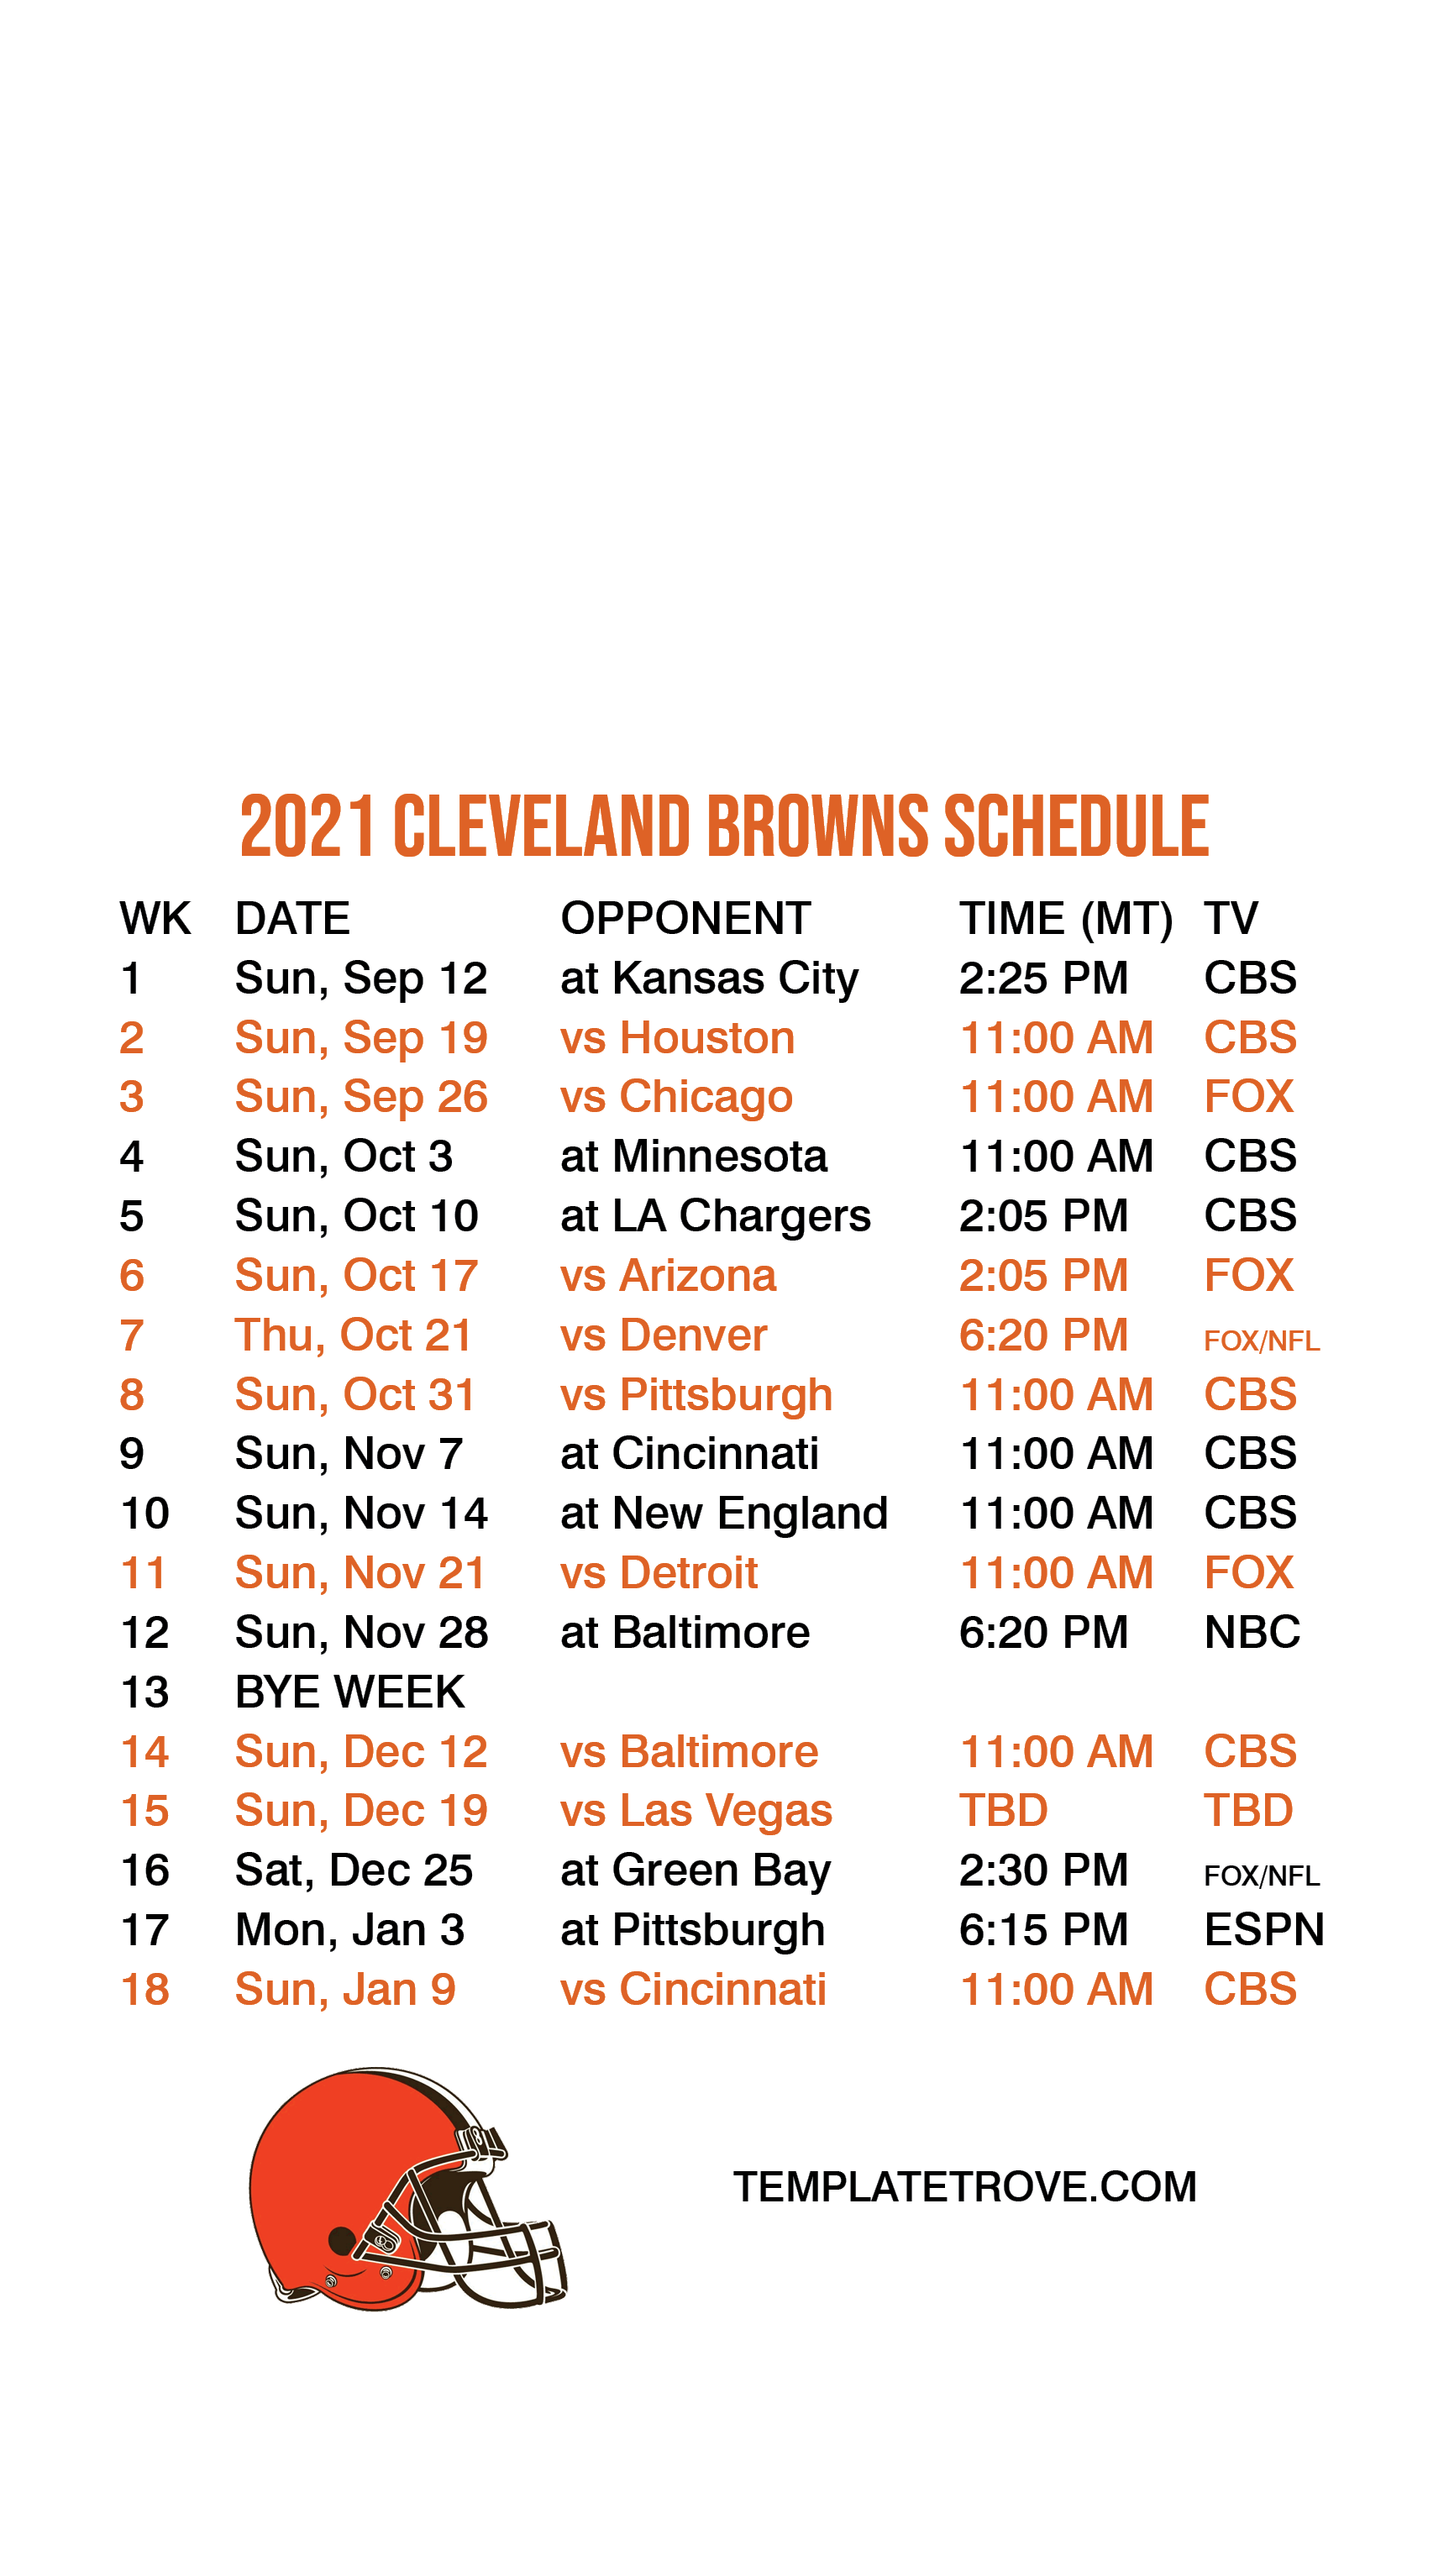 2021-2022 Cleveland Browns Lock Screen Schedule for iPhone 6-7-8 Plus